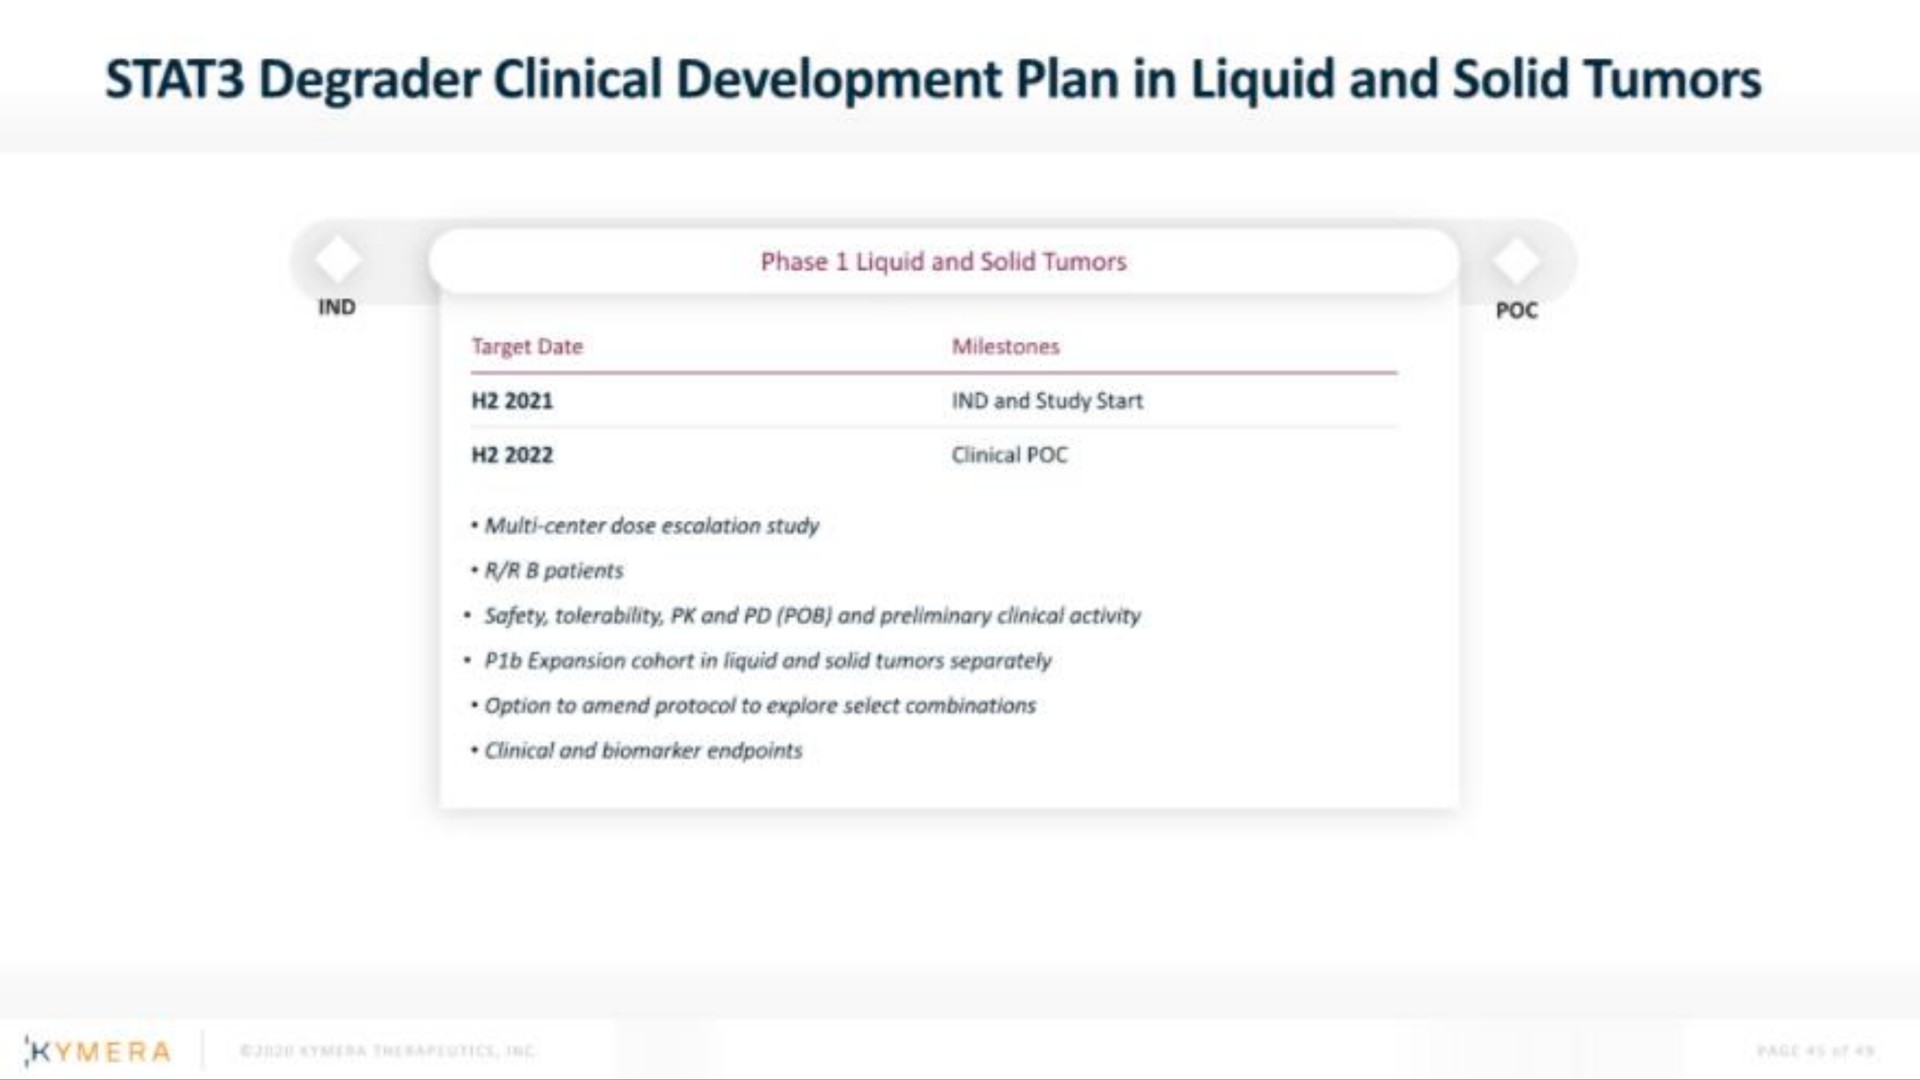 degrader clinical development plan in liquid and solid tumors | Kymera